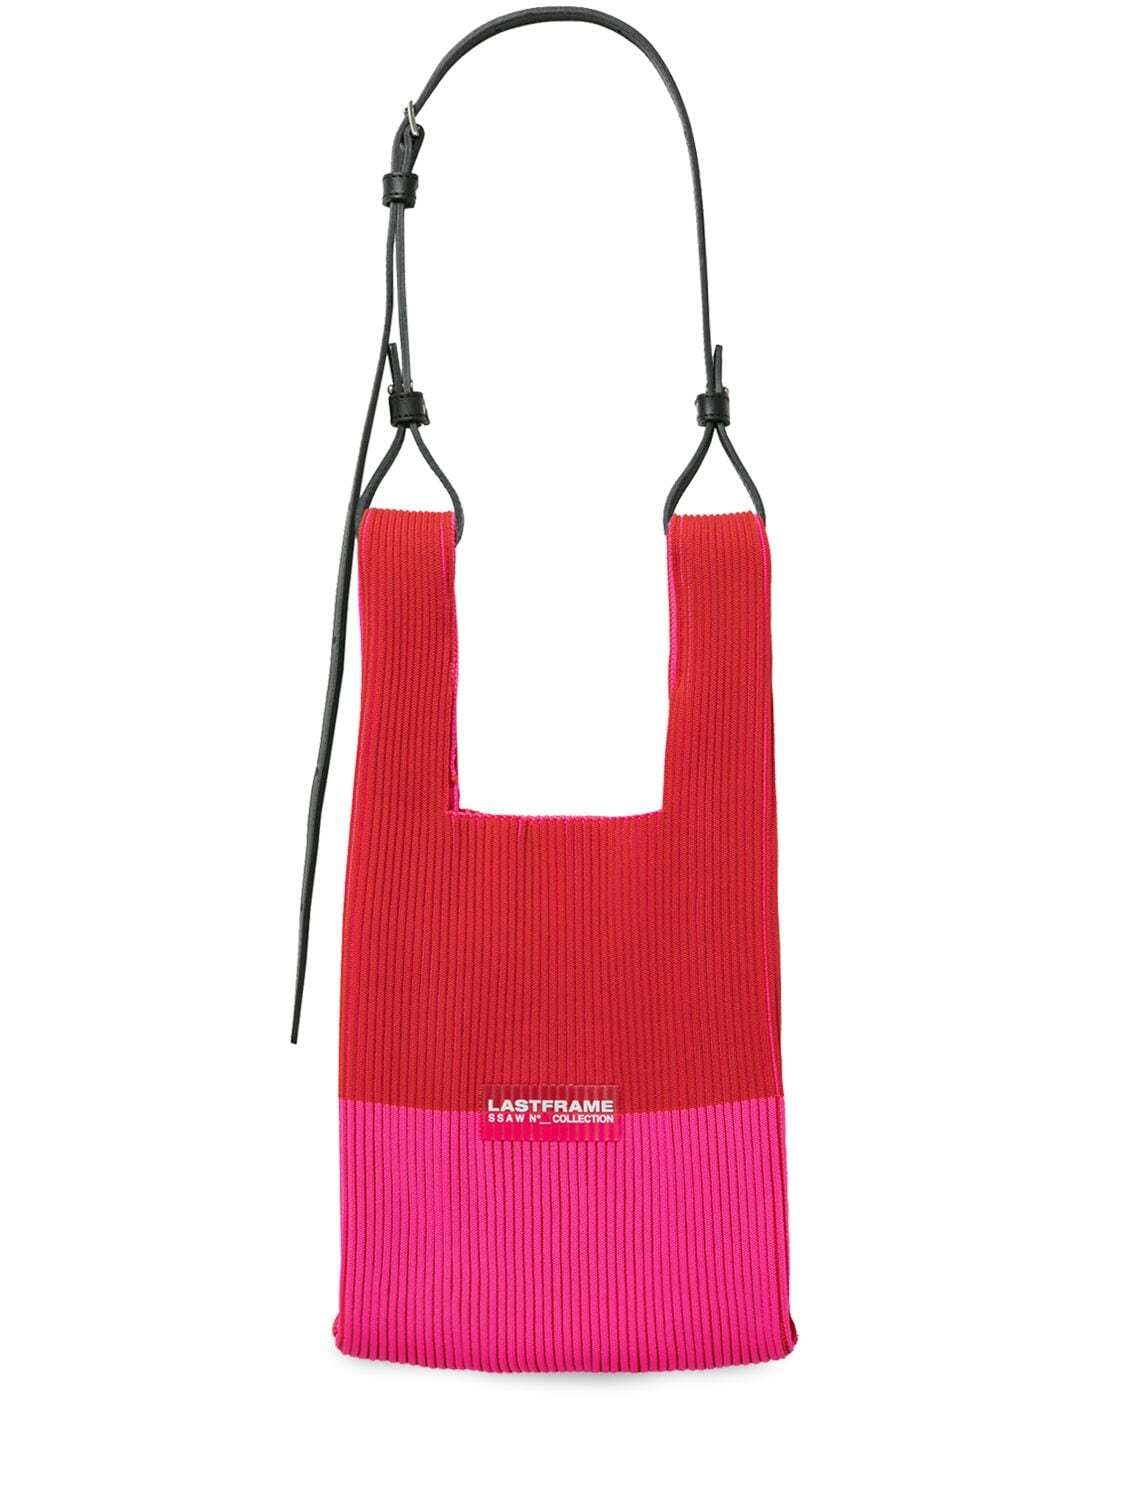 LASTFRAME Small Bi-color Market Bag in pink / red